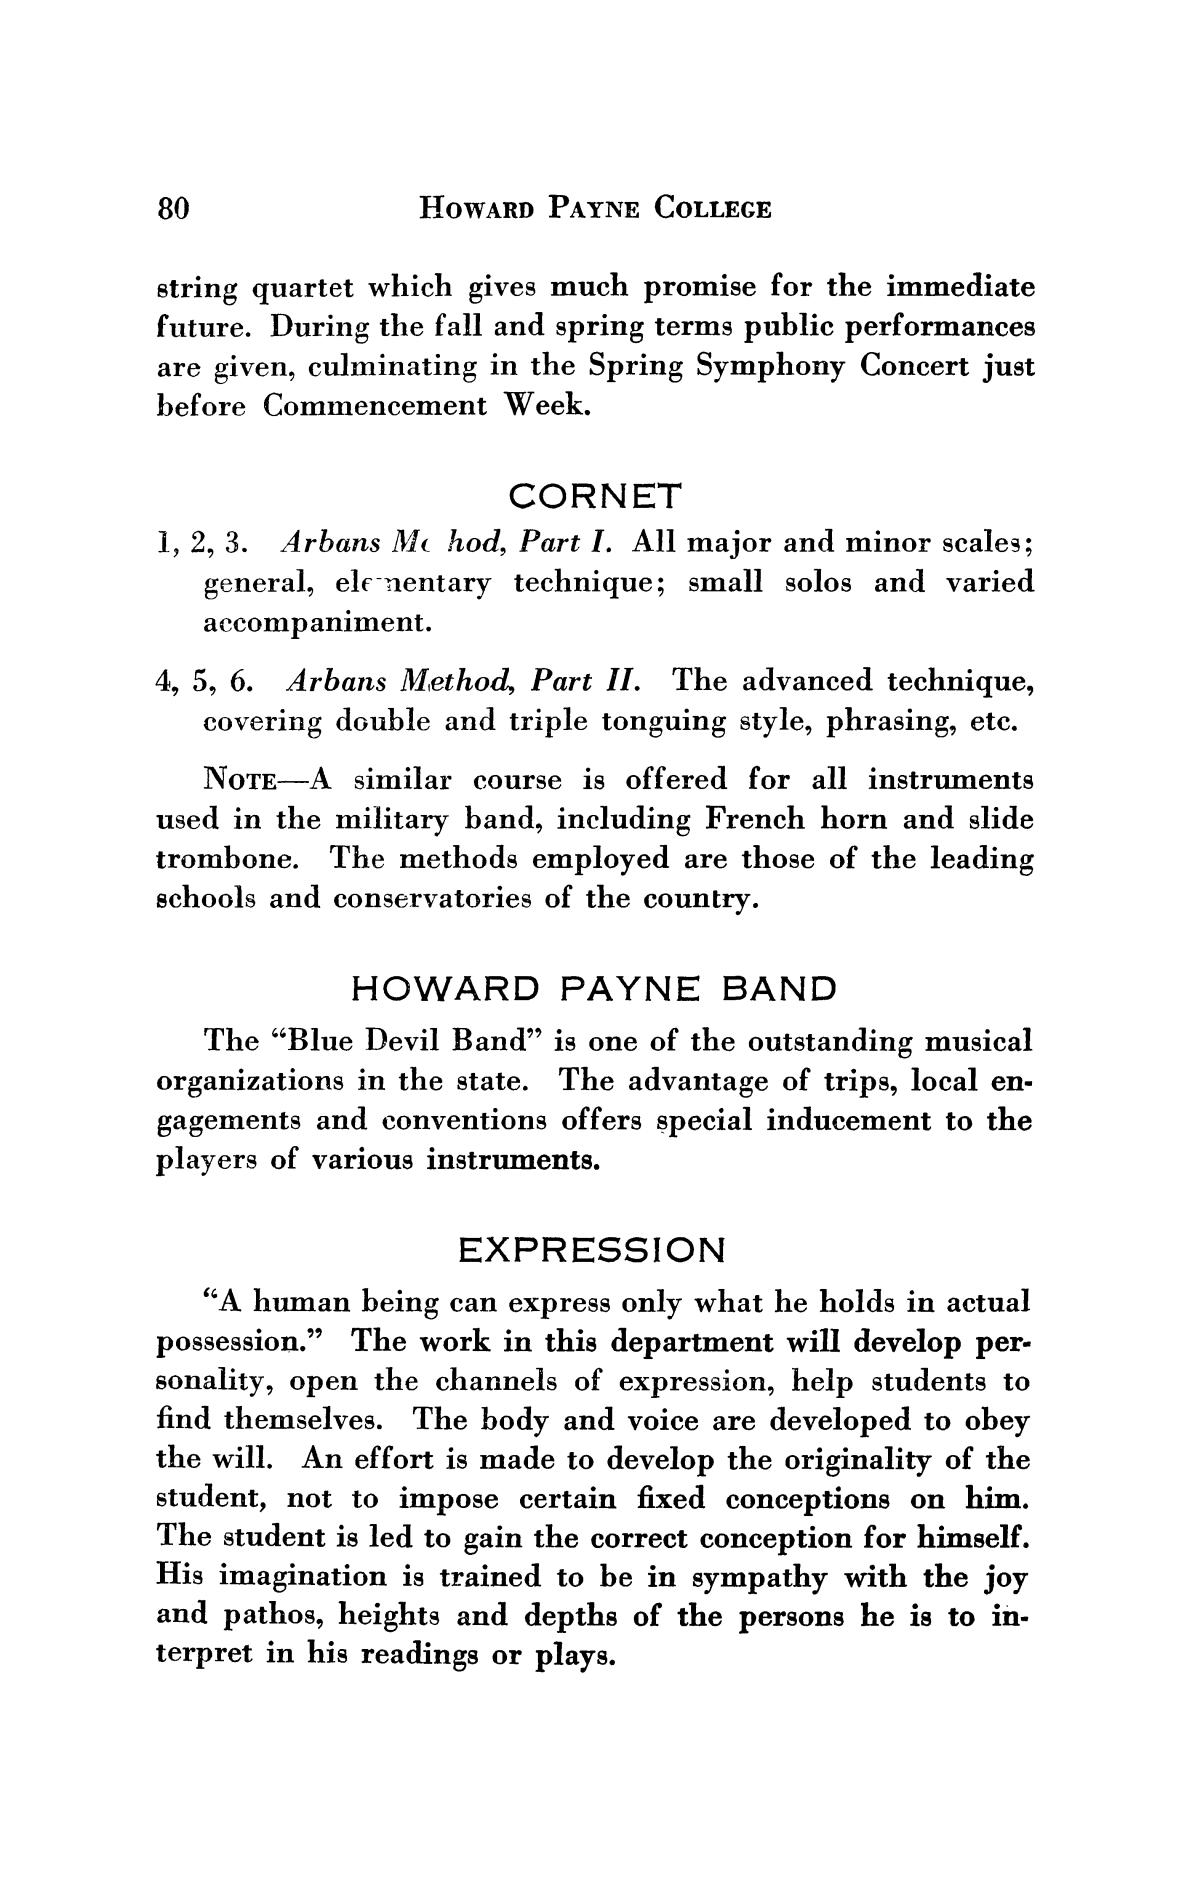 Catalogue of Howard Payne College, 1925-1926
                                                
                                                    80
                                                